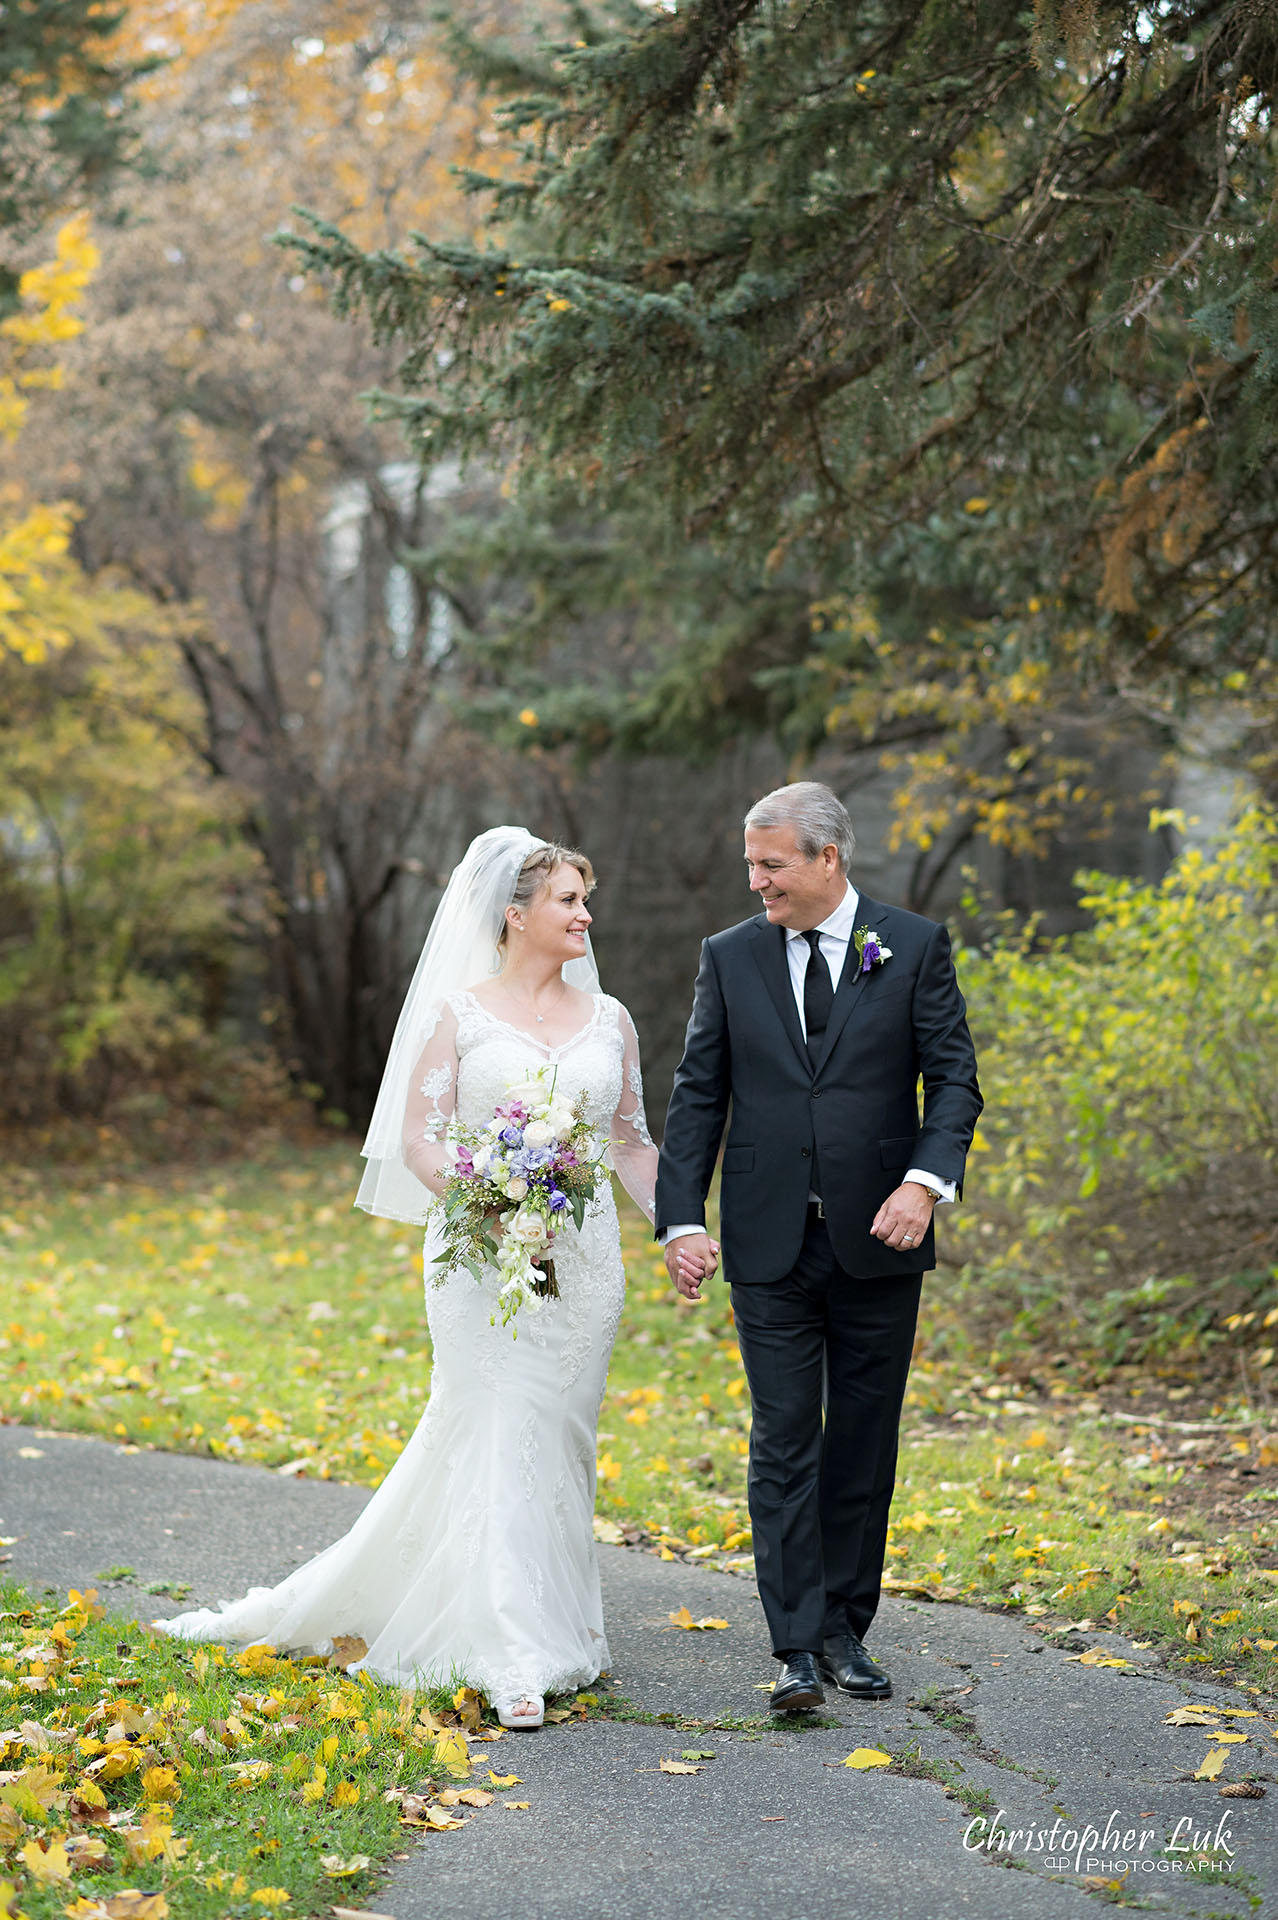 Christopher Luk Toronto Wedding Photographer Natural Candid Photojournalistic Tyndale Chapel Autumn Fall Leaves Bride Groom Holding Hands Walking Together Portrait